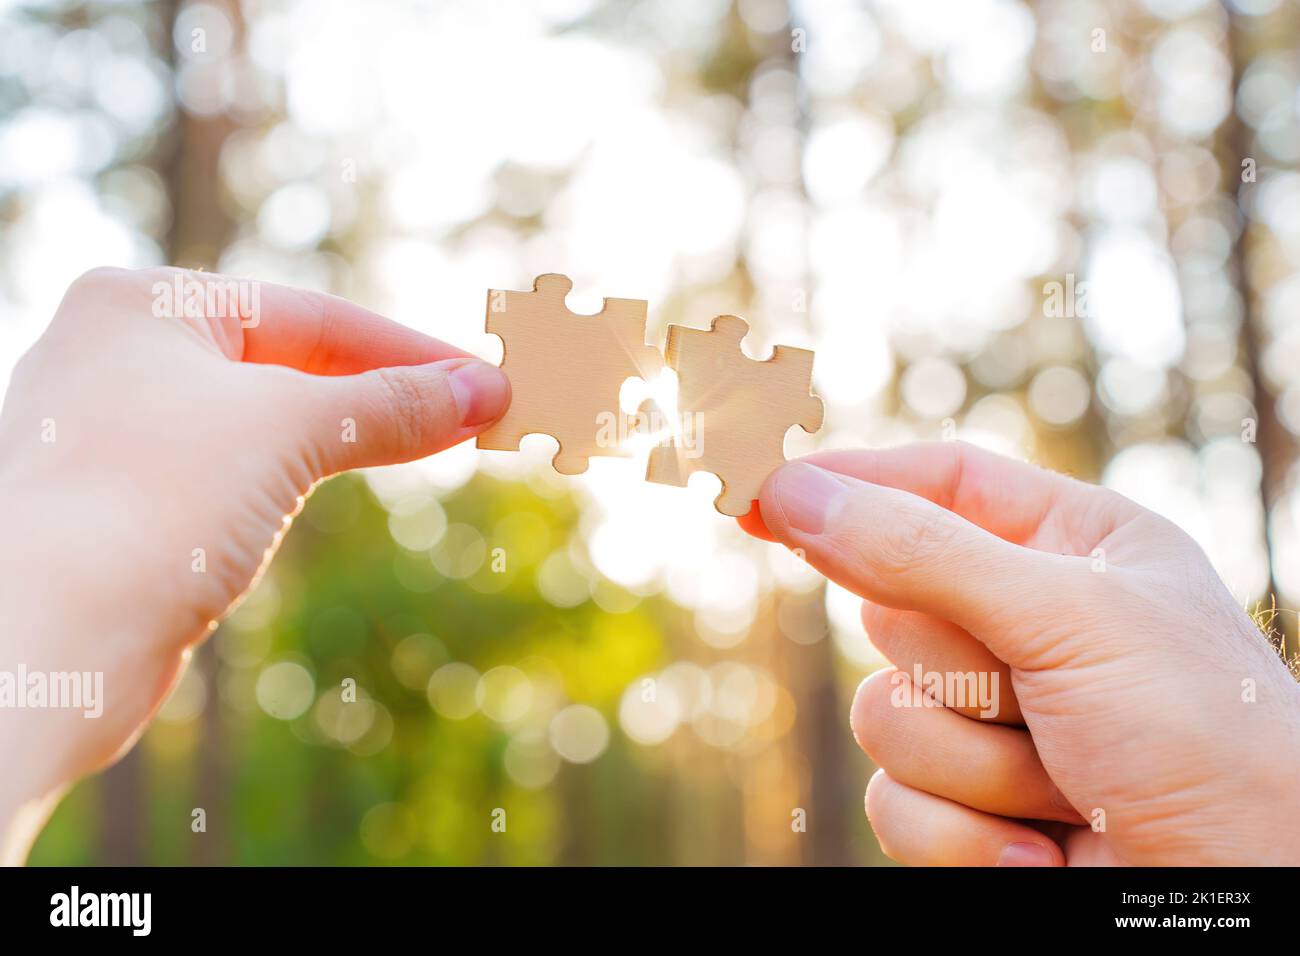 Hands connecting two puzzle pieces with sun rays coming through against forest background. Teamwork and business cooperation concept. Stock Photo